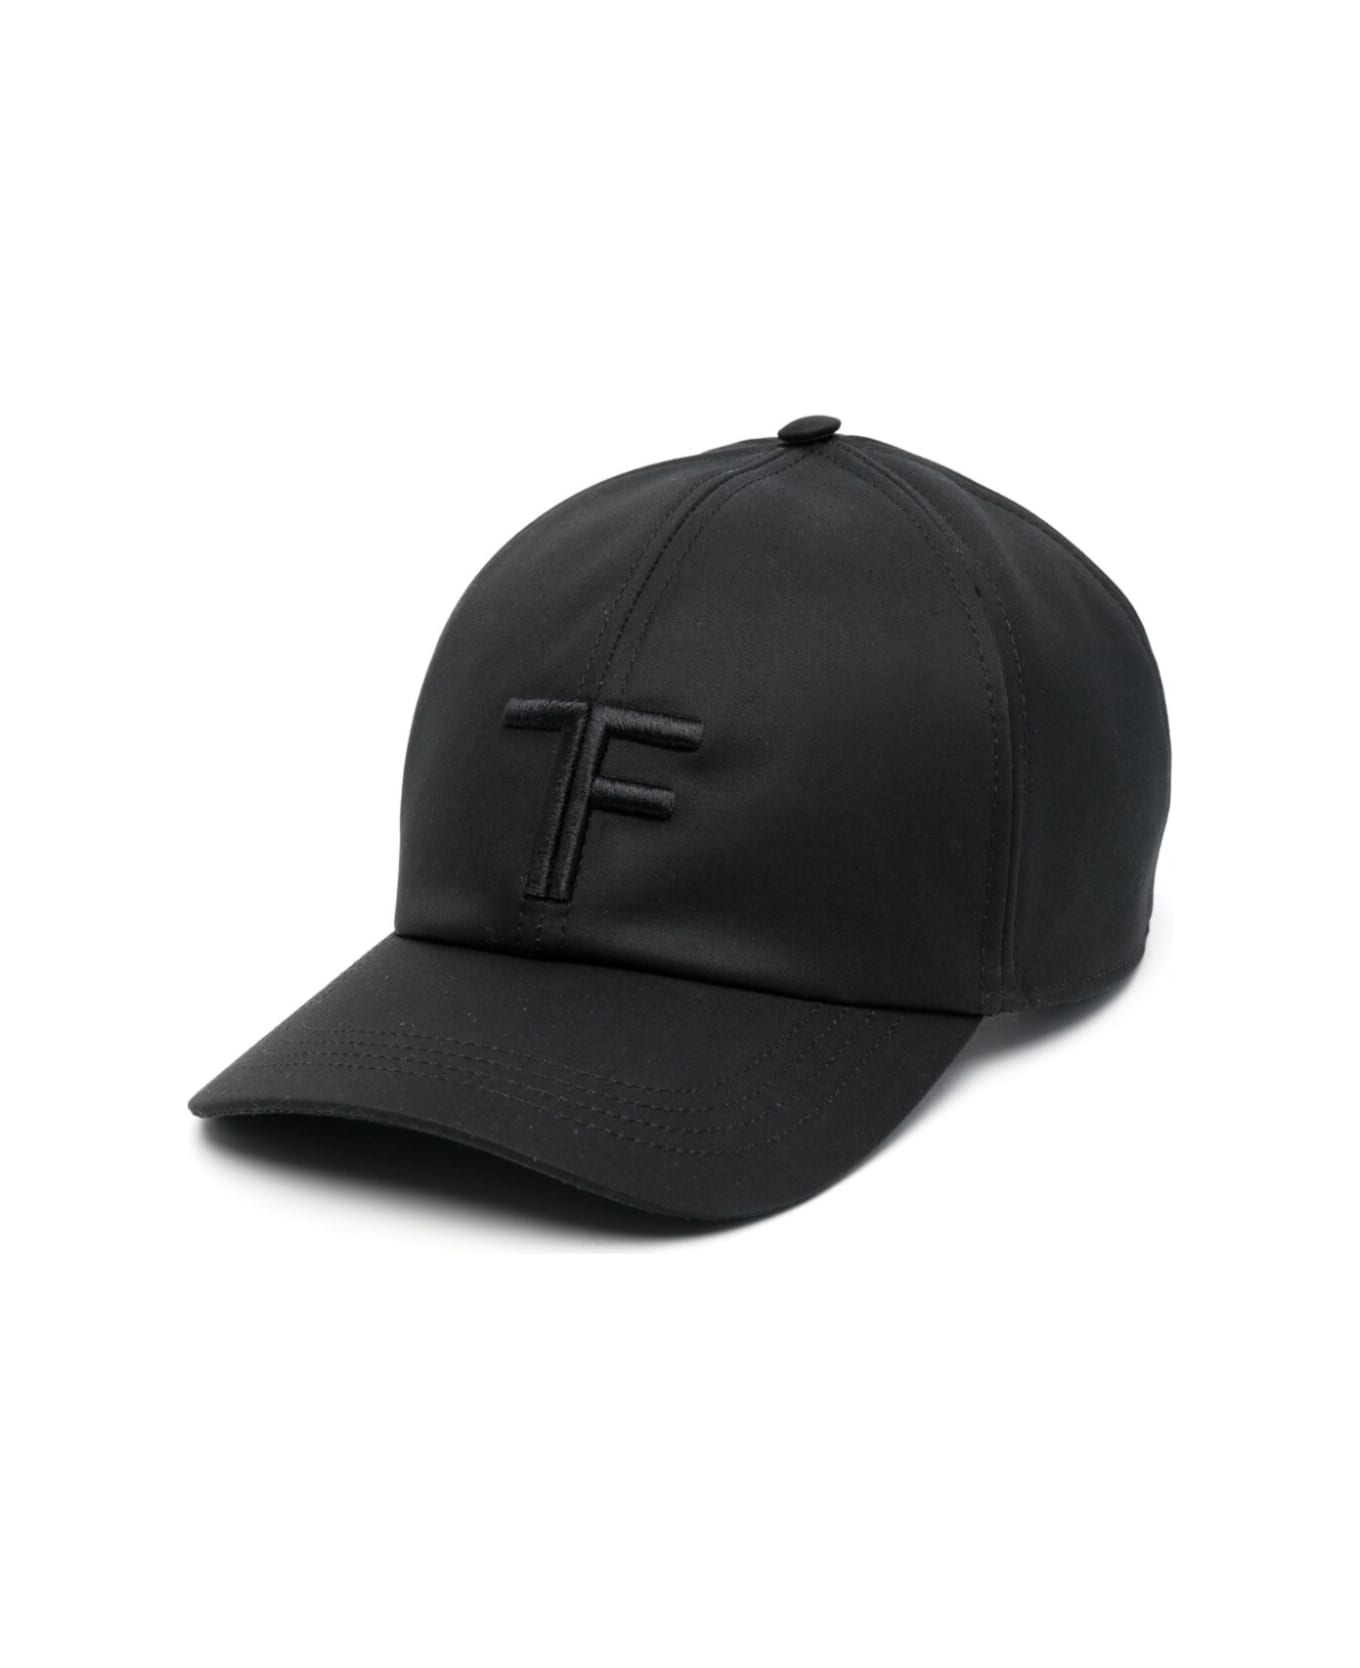 Tom Ford Black Baseball Cap With Tf Logo Embroidery In Cotton Man - Black